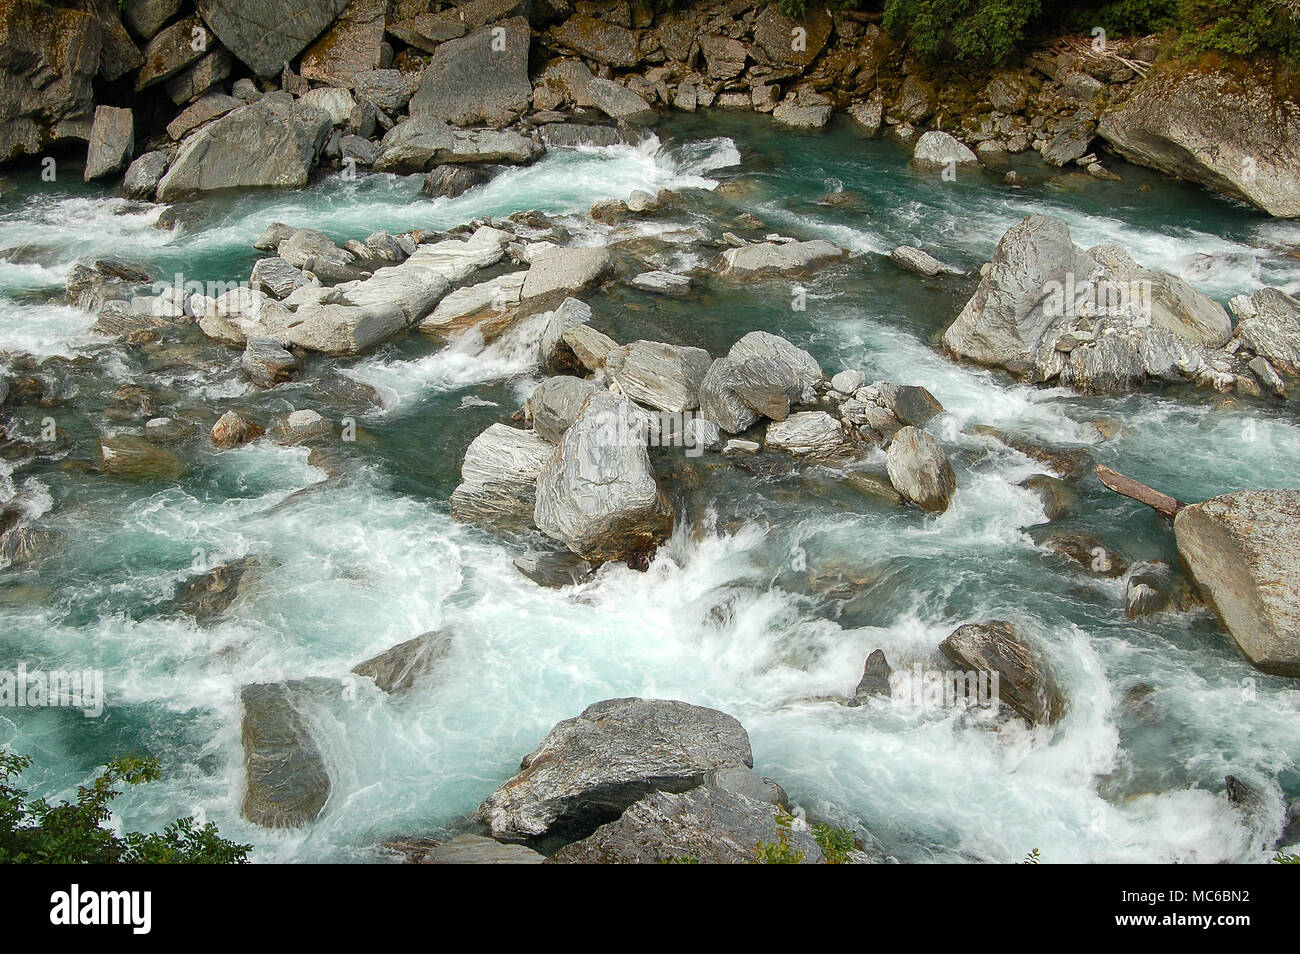 Polished rocks in the Haast River at the Thunder Creek Falls - South Island, New Zealand Stock Photo